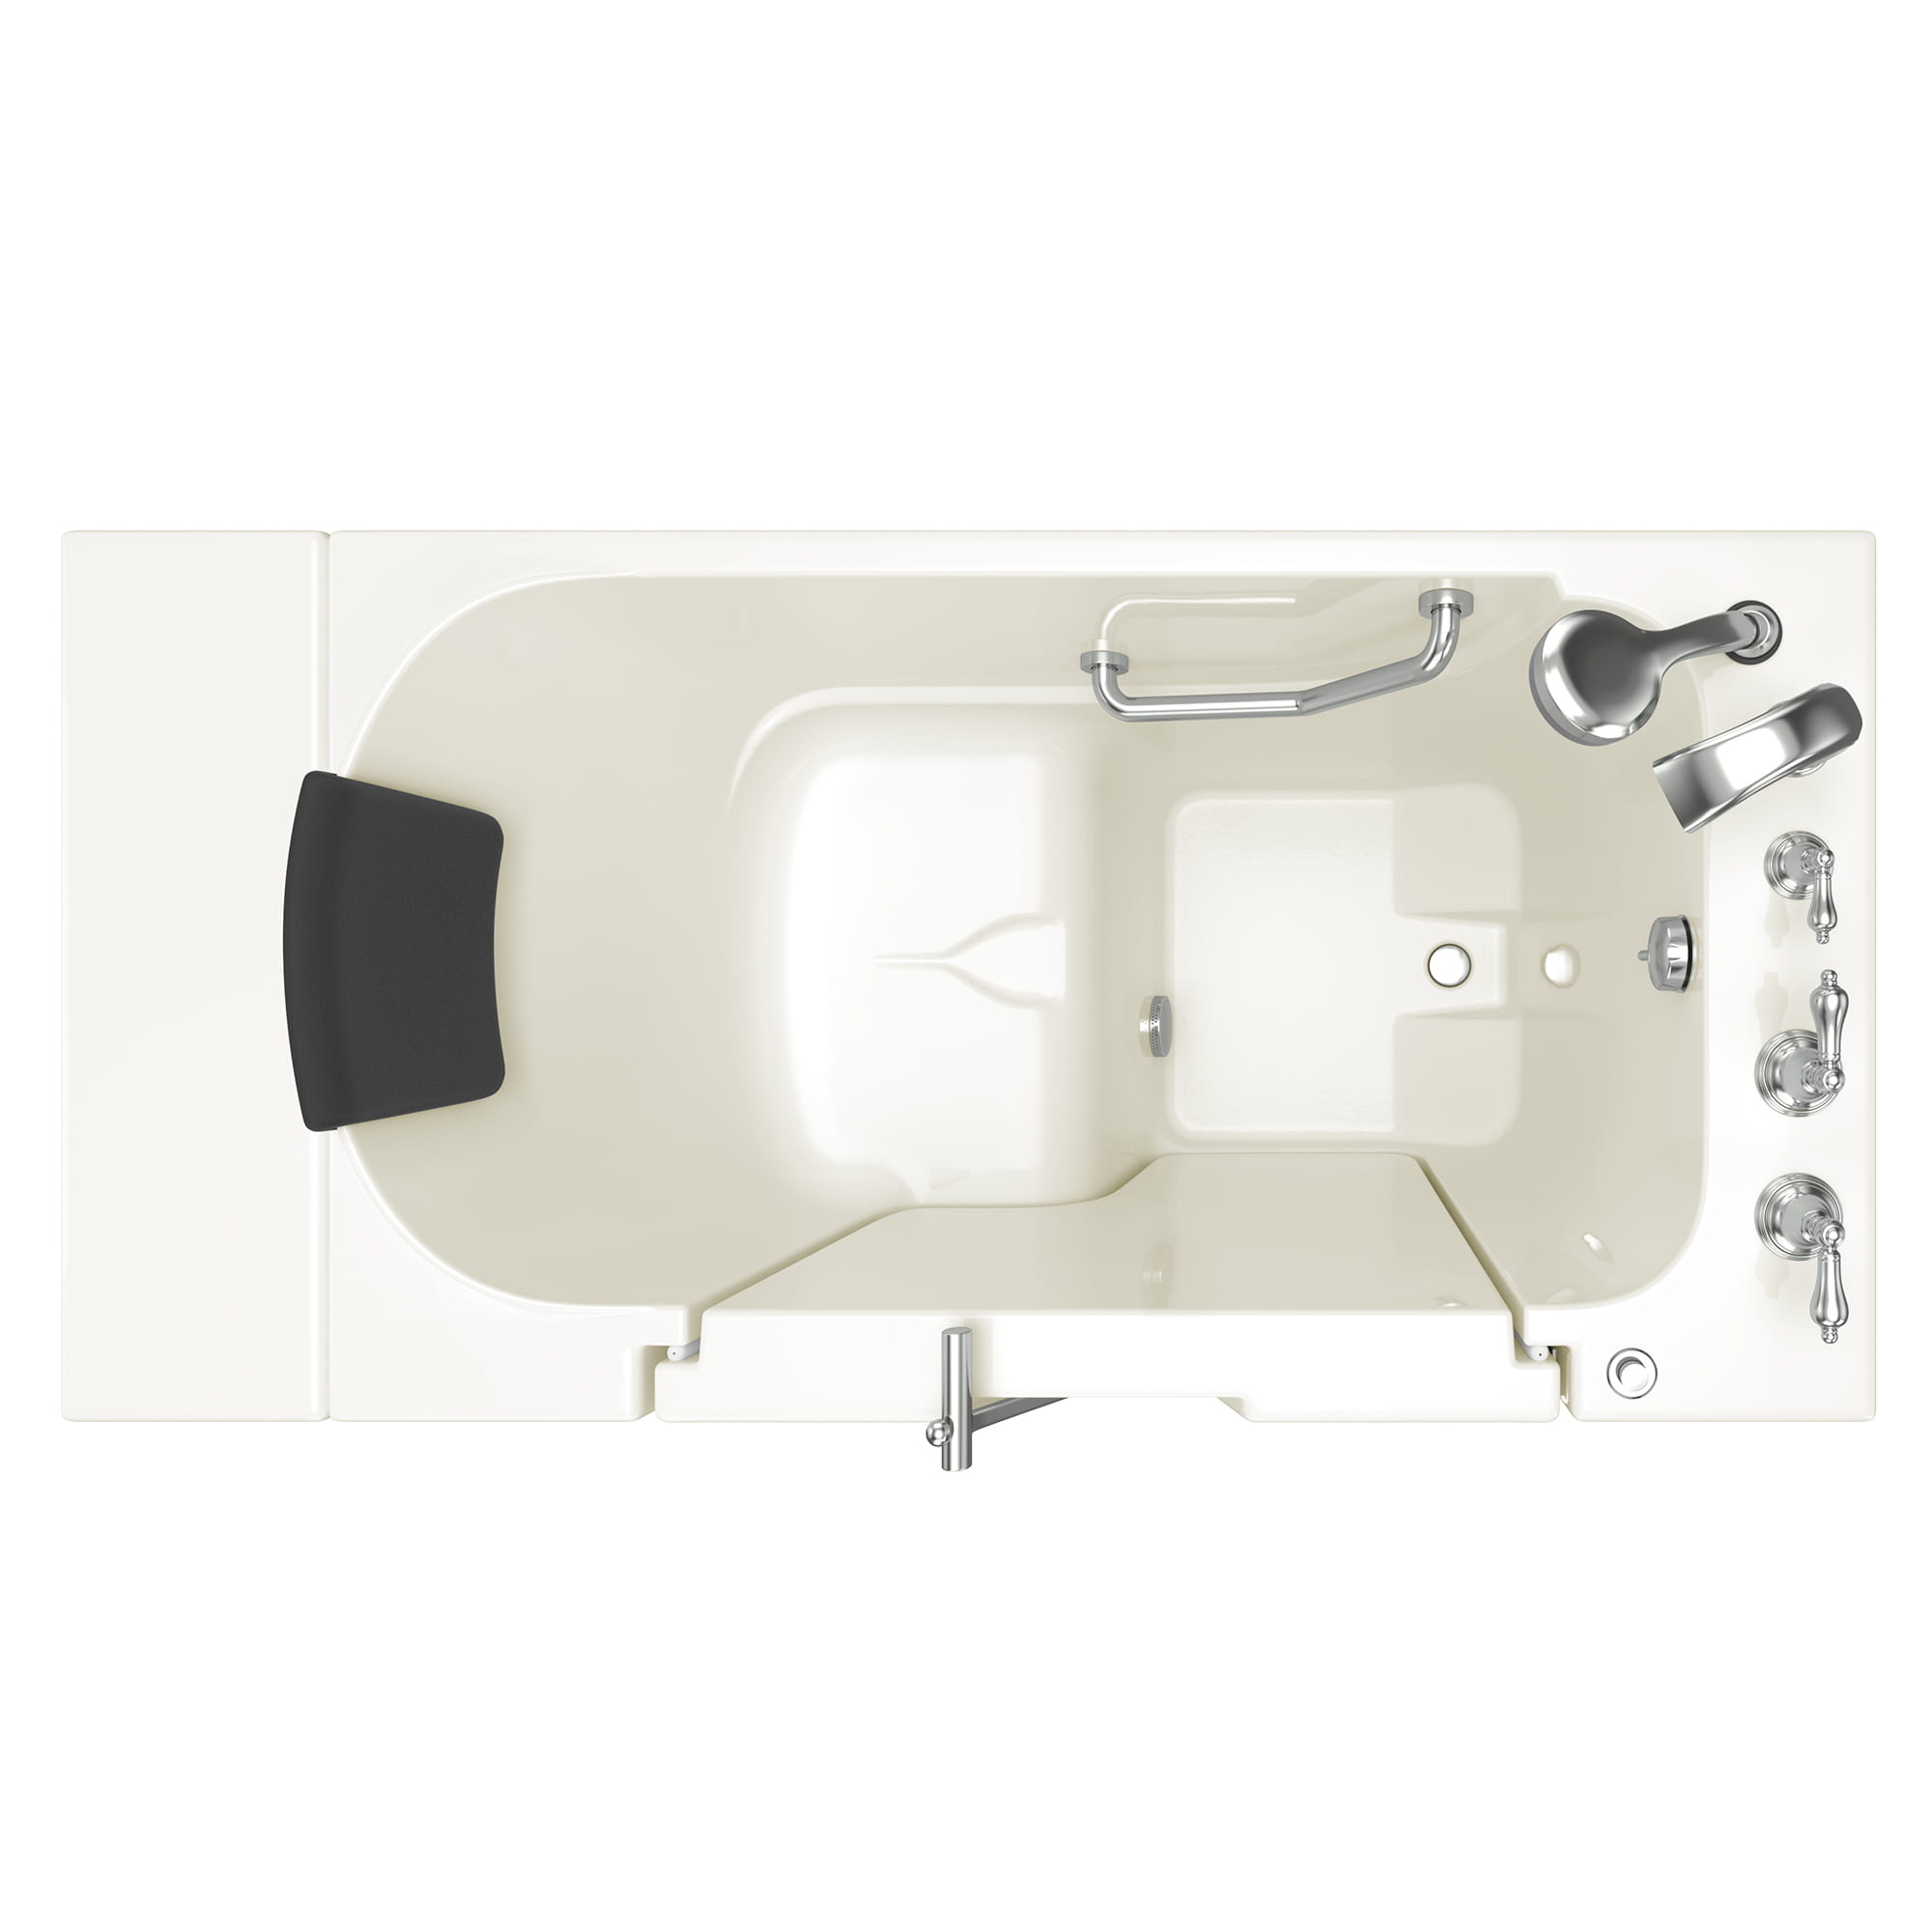 Gelcoat Premium Series 30 x 52 -Inch Walk-in Tub With Soaker System - Right-Hand Drain With Faucet